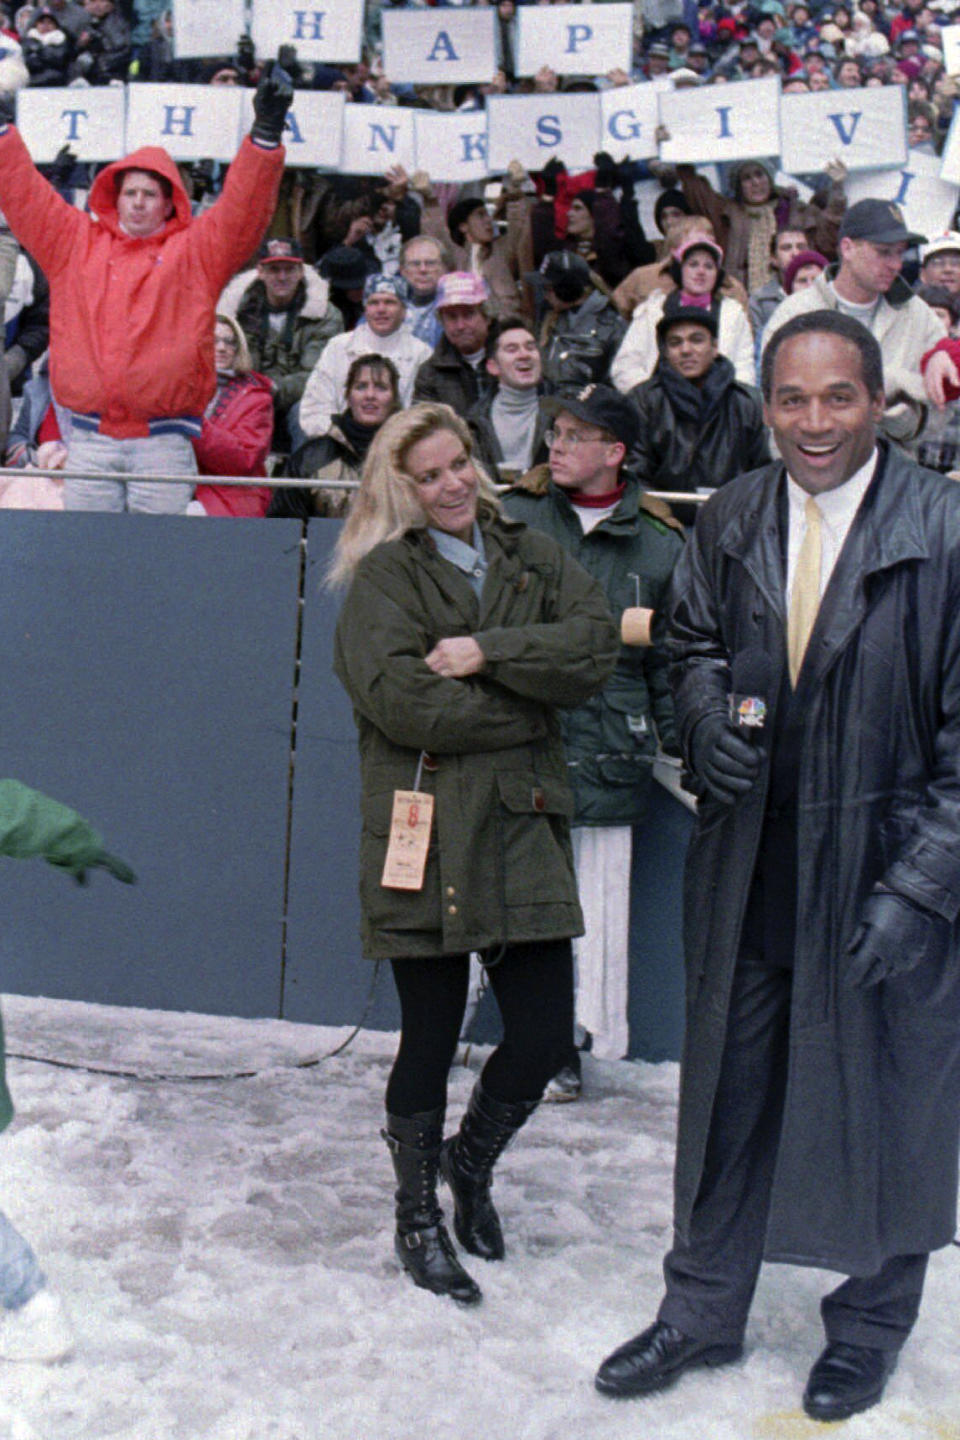 FILE - O.J. Simpson wears gloves as he stands with his wife Nicole on the sidelines of Texas Stadium in Irving, Texas, during the Thanksgiving Day NFL football game between the Dallas Cowboys and the Miami Dolphins on Nov. 24, 1993. Simpson, the decorated football superstar and Hollywood actor who was acquitted of charges he killed his former wife and her friend but later found liable in a separate civil trial, has died. He was 76. (AP Photo/Ron Heflin, File)